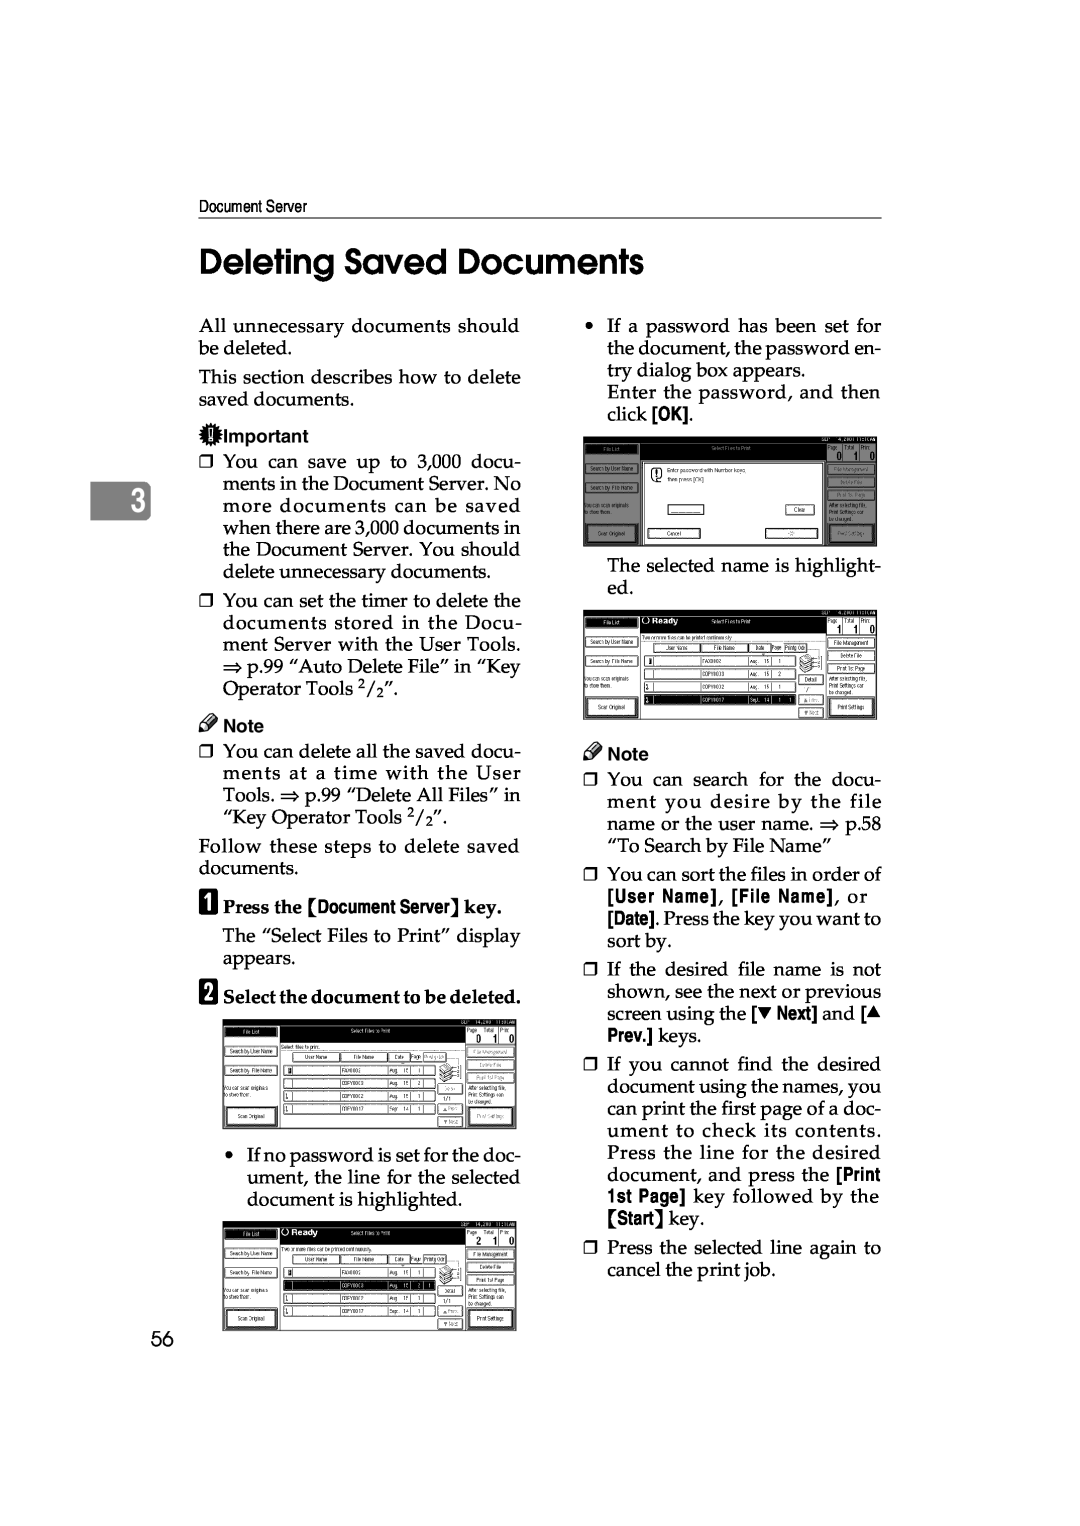 Lanier 5627 AG Deleting Saved Documents, B Select the document to be deleted, A Press the Document Server key, Prev. keys 